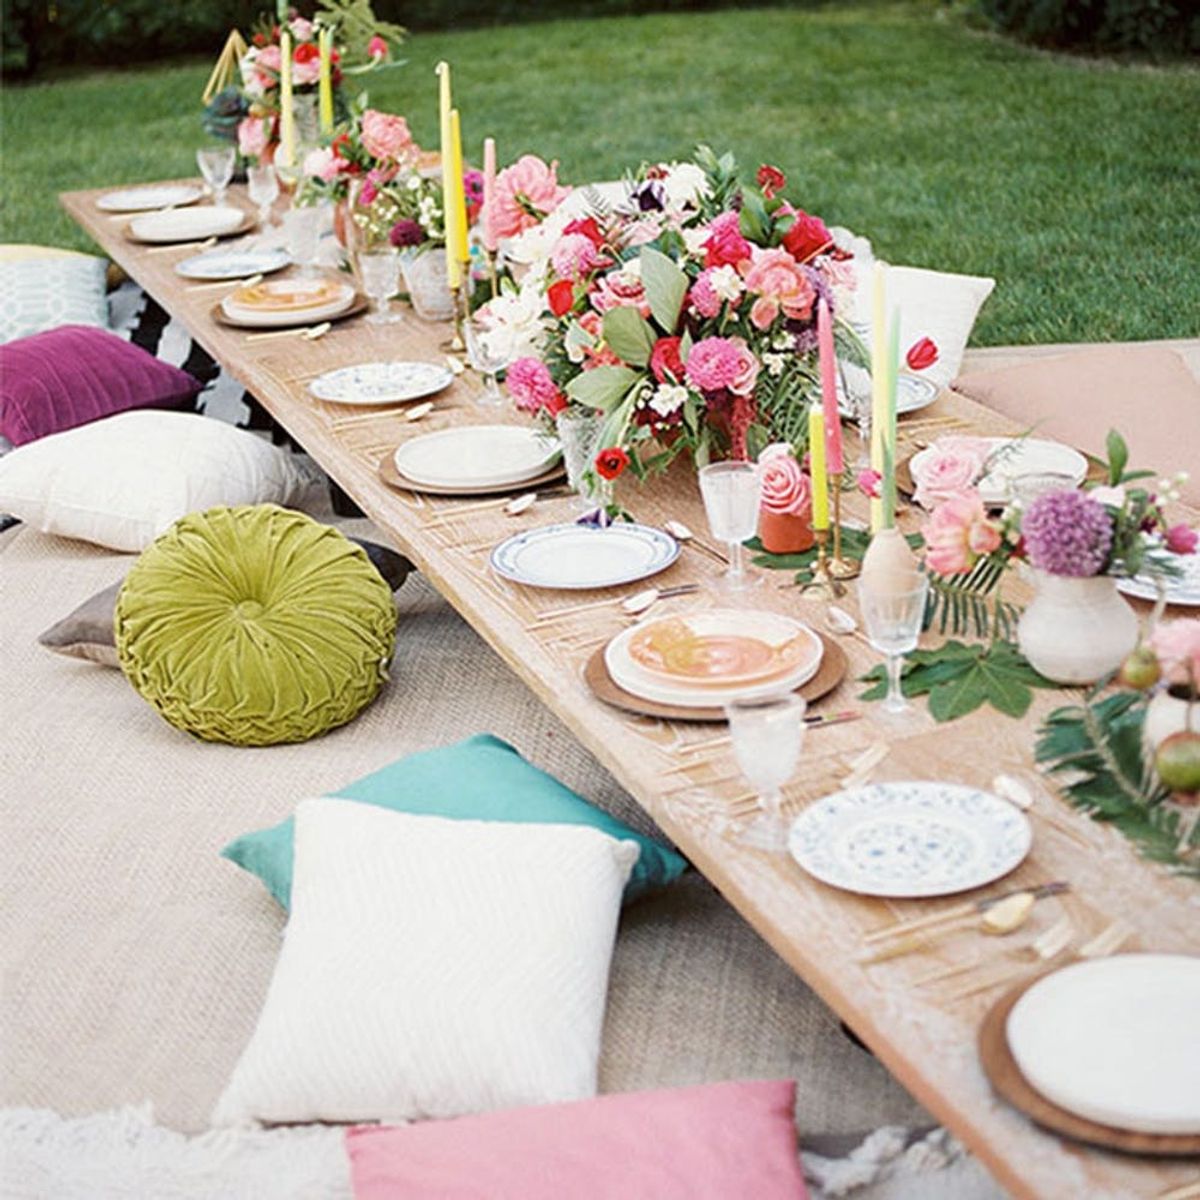 13 Ideas for a Bangin’ Boho-Inspired 31st Birthday Party